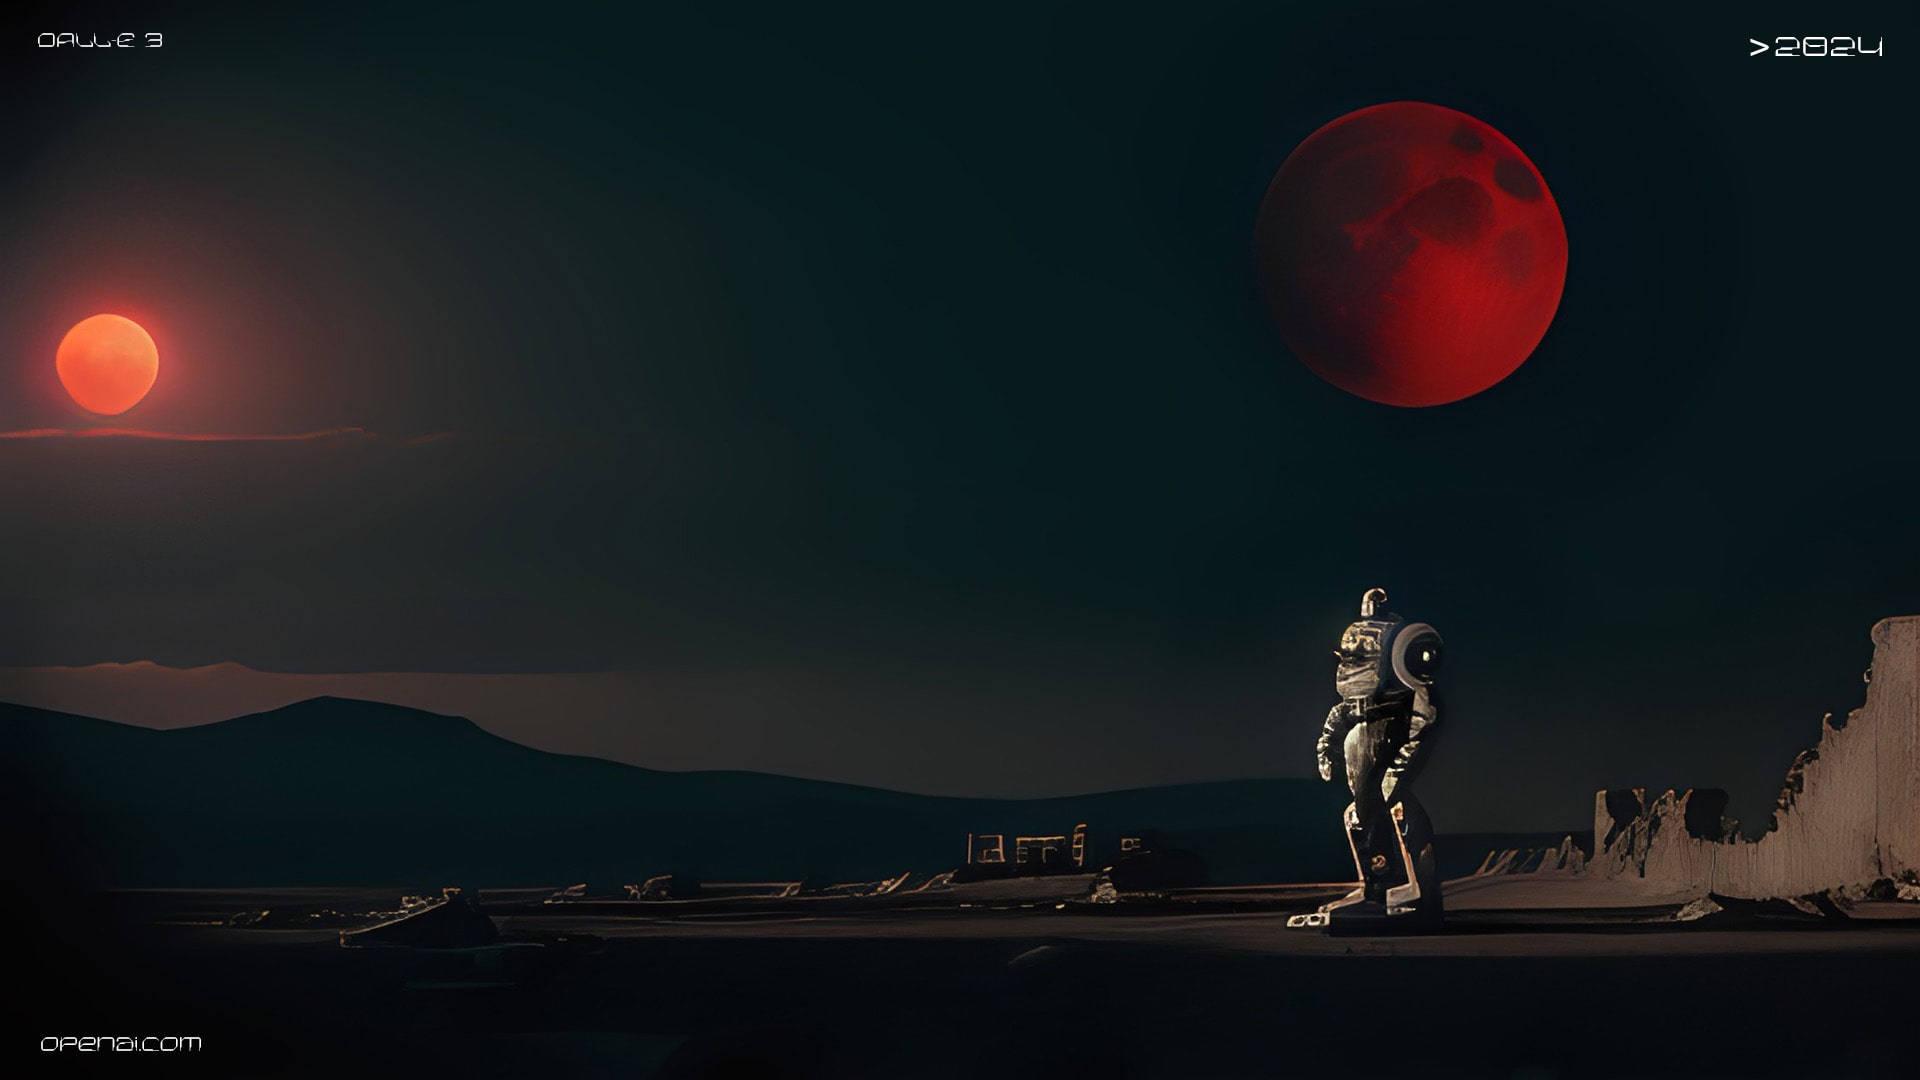 A lone robot gazing at the ruins of a futuristic city under a blood-red moon